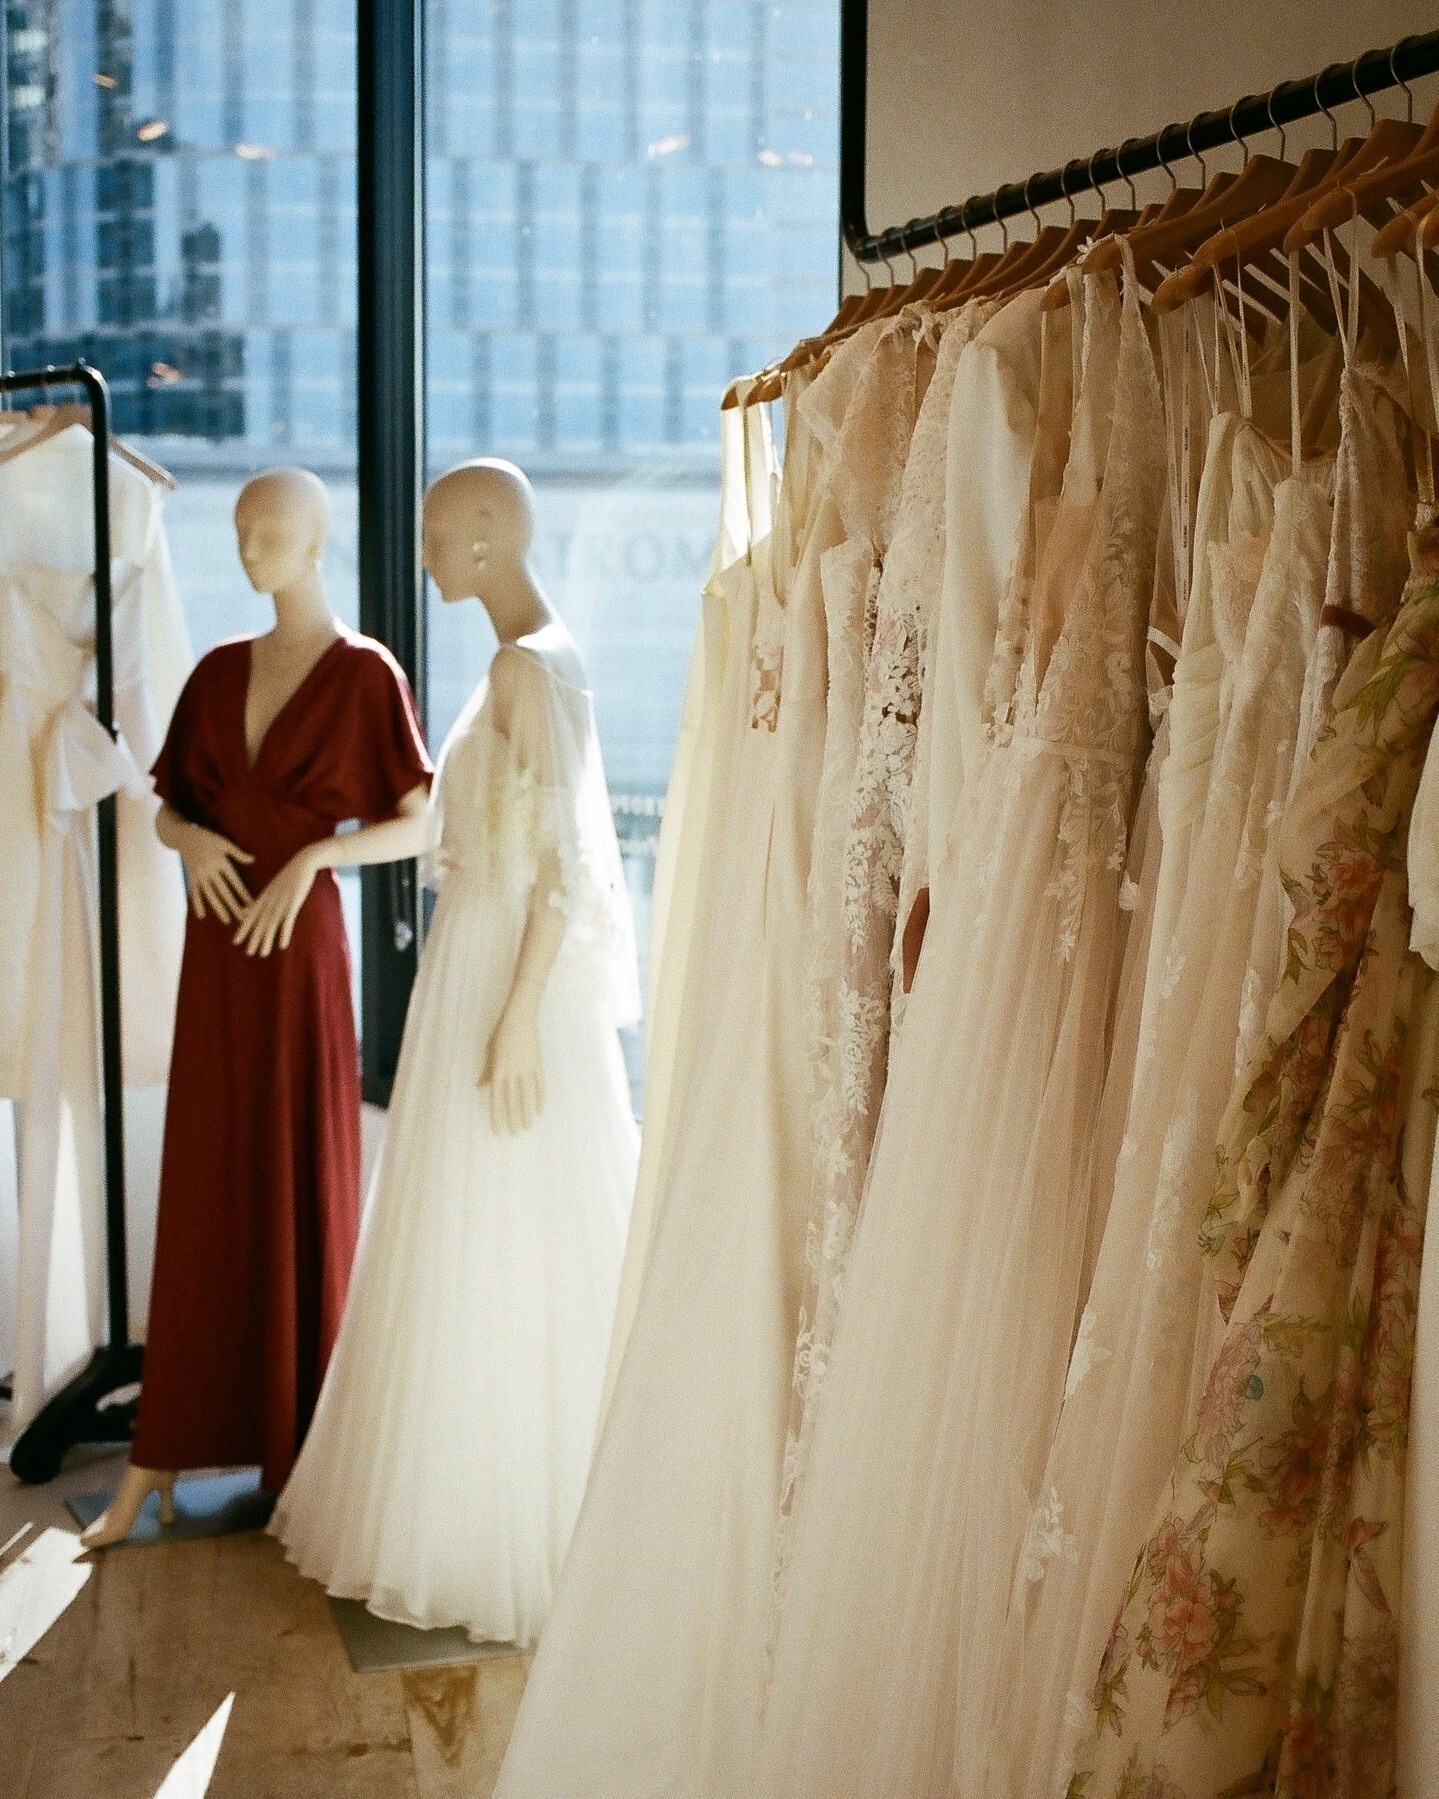 A range of wedding dresses are displayed at an Anthropologie store at BHLDN Century City, Los Angeles